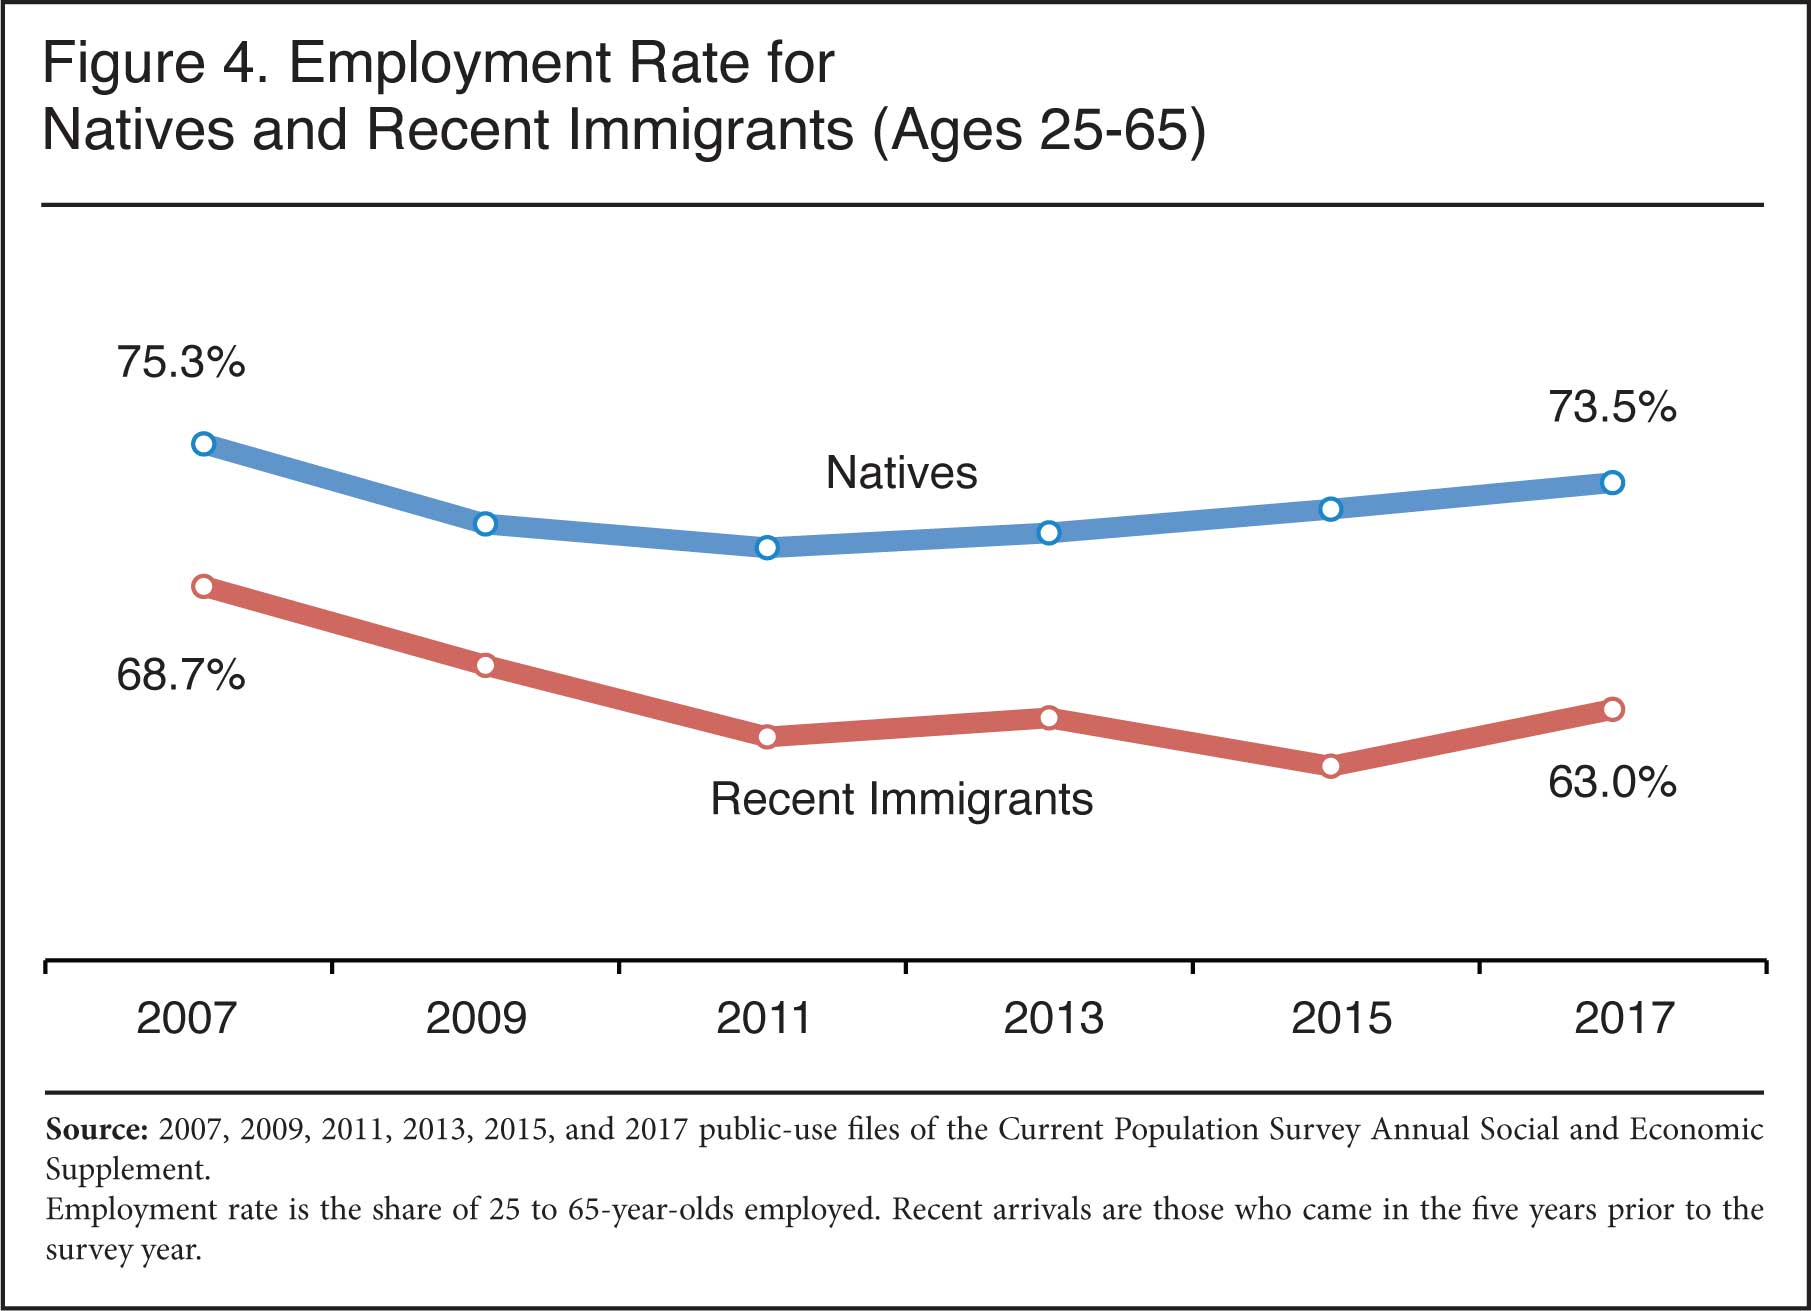 Graph: Employment Rate for Natives and Recent Immigrants, 2007 to 2017